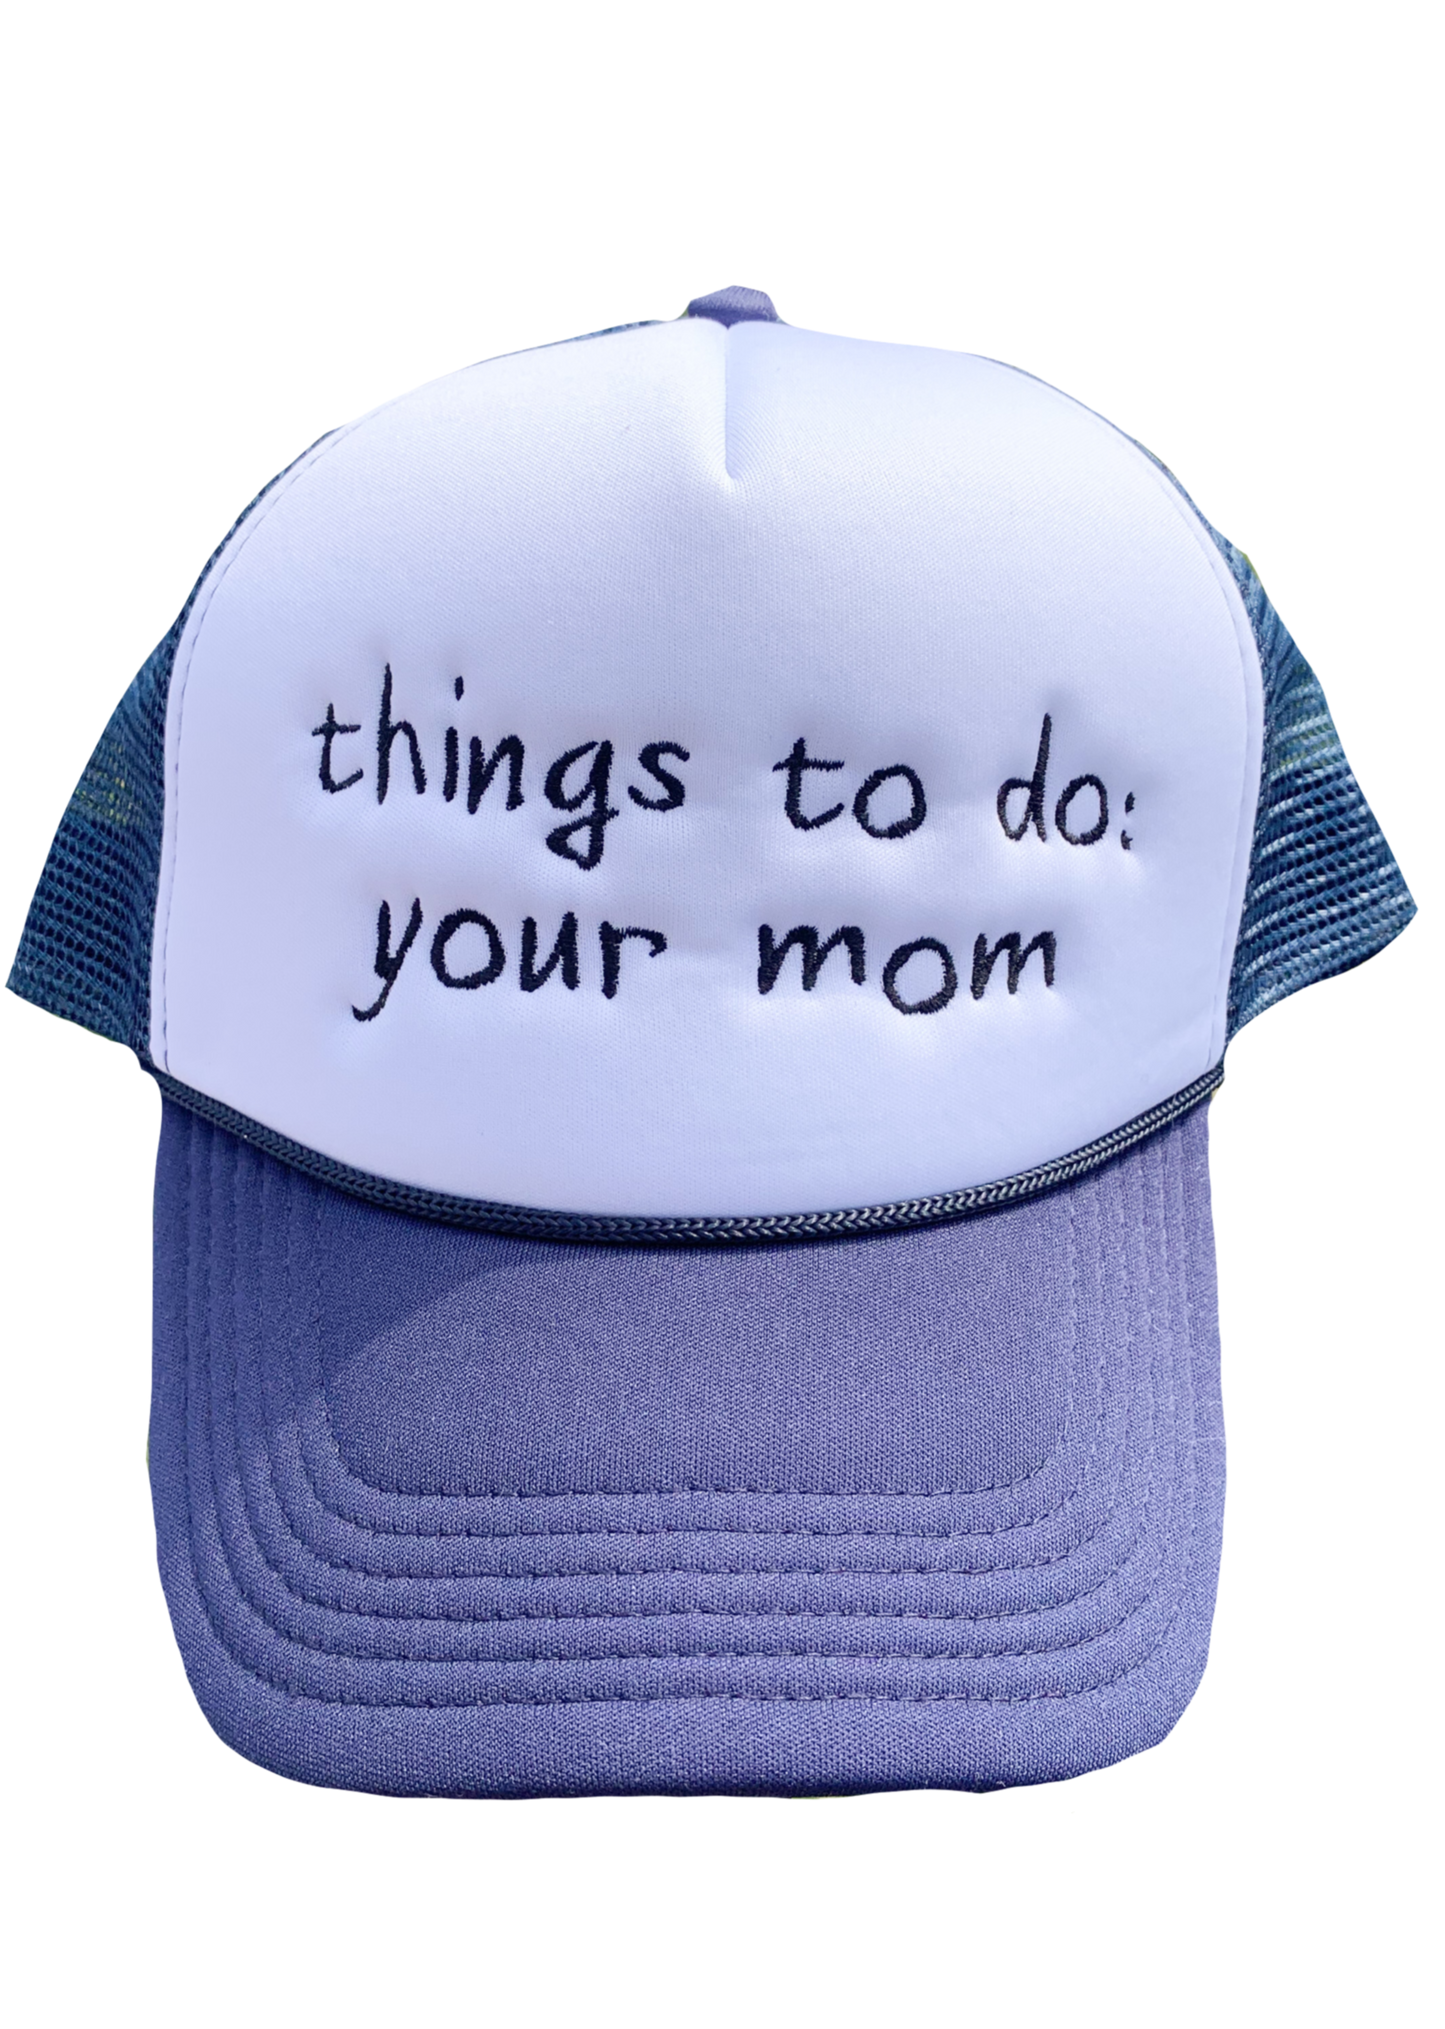 Things to do: Your Mom Foam Trucker Hat